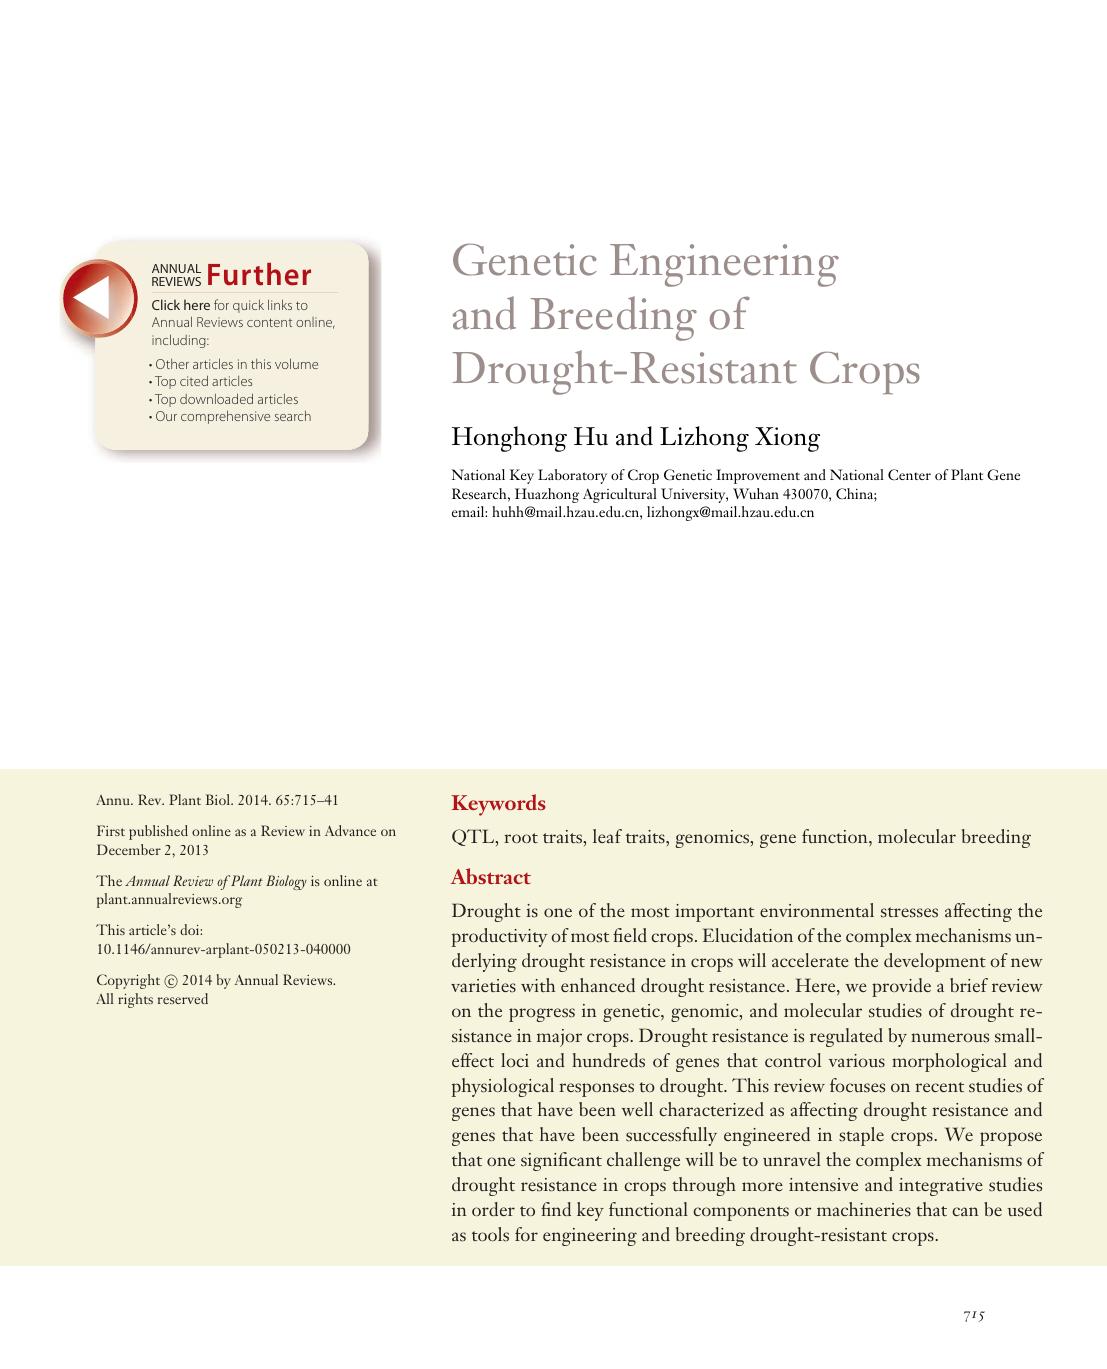 Genetic Engineering and Breeding of Drought-Resistant Crops by Honghong Hu and Lizhong Xiong